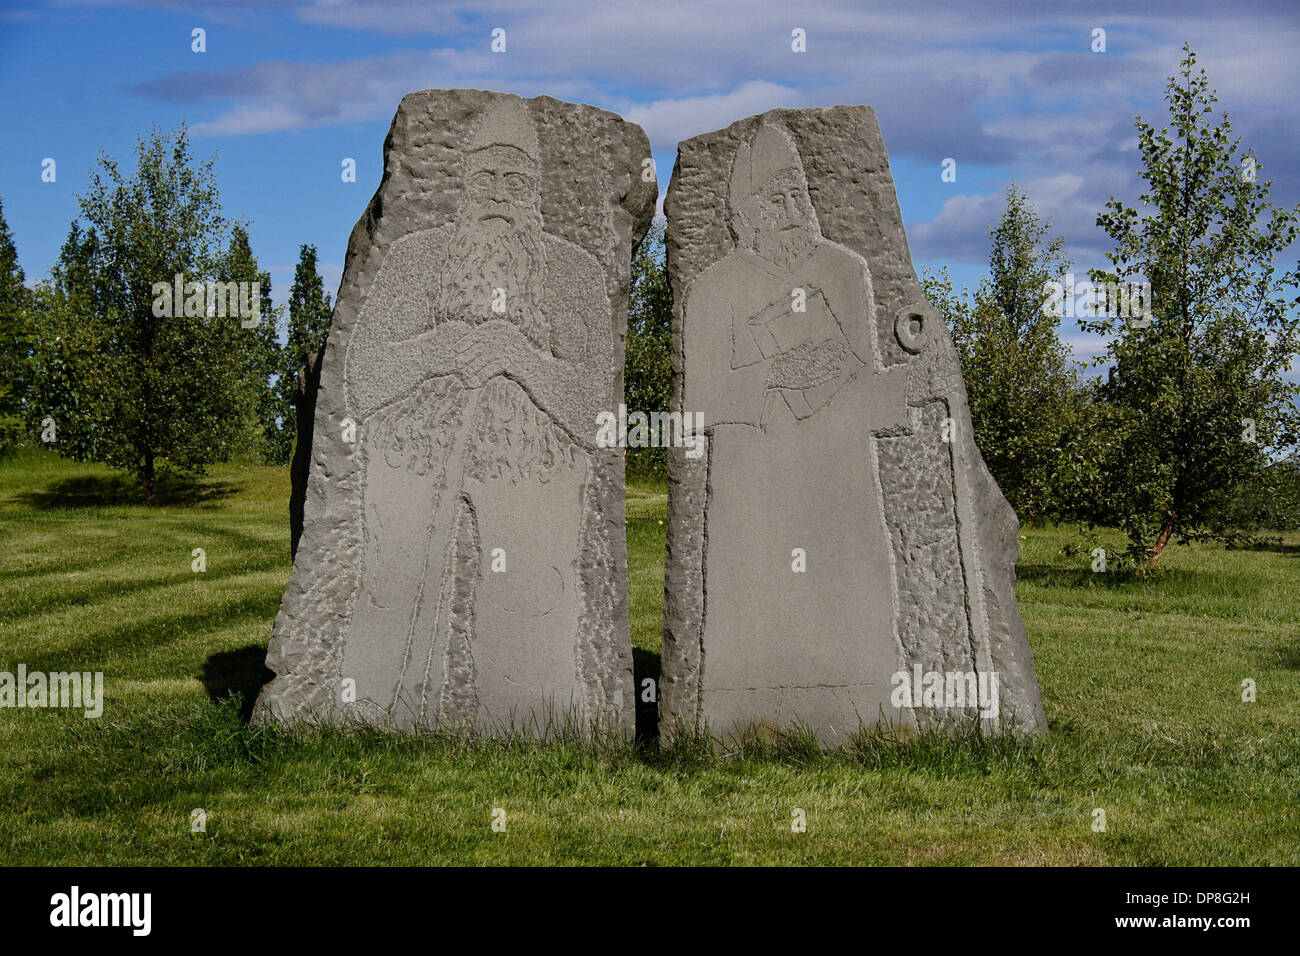 Carved stones representing paganism and Christianity, Skalholt Church, Iceland Stock Photo